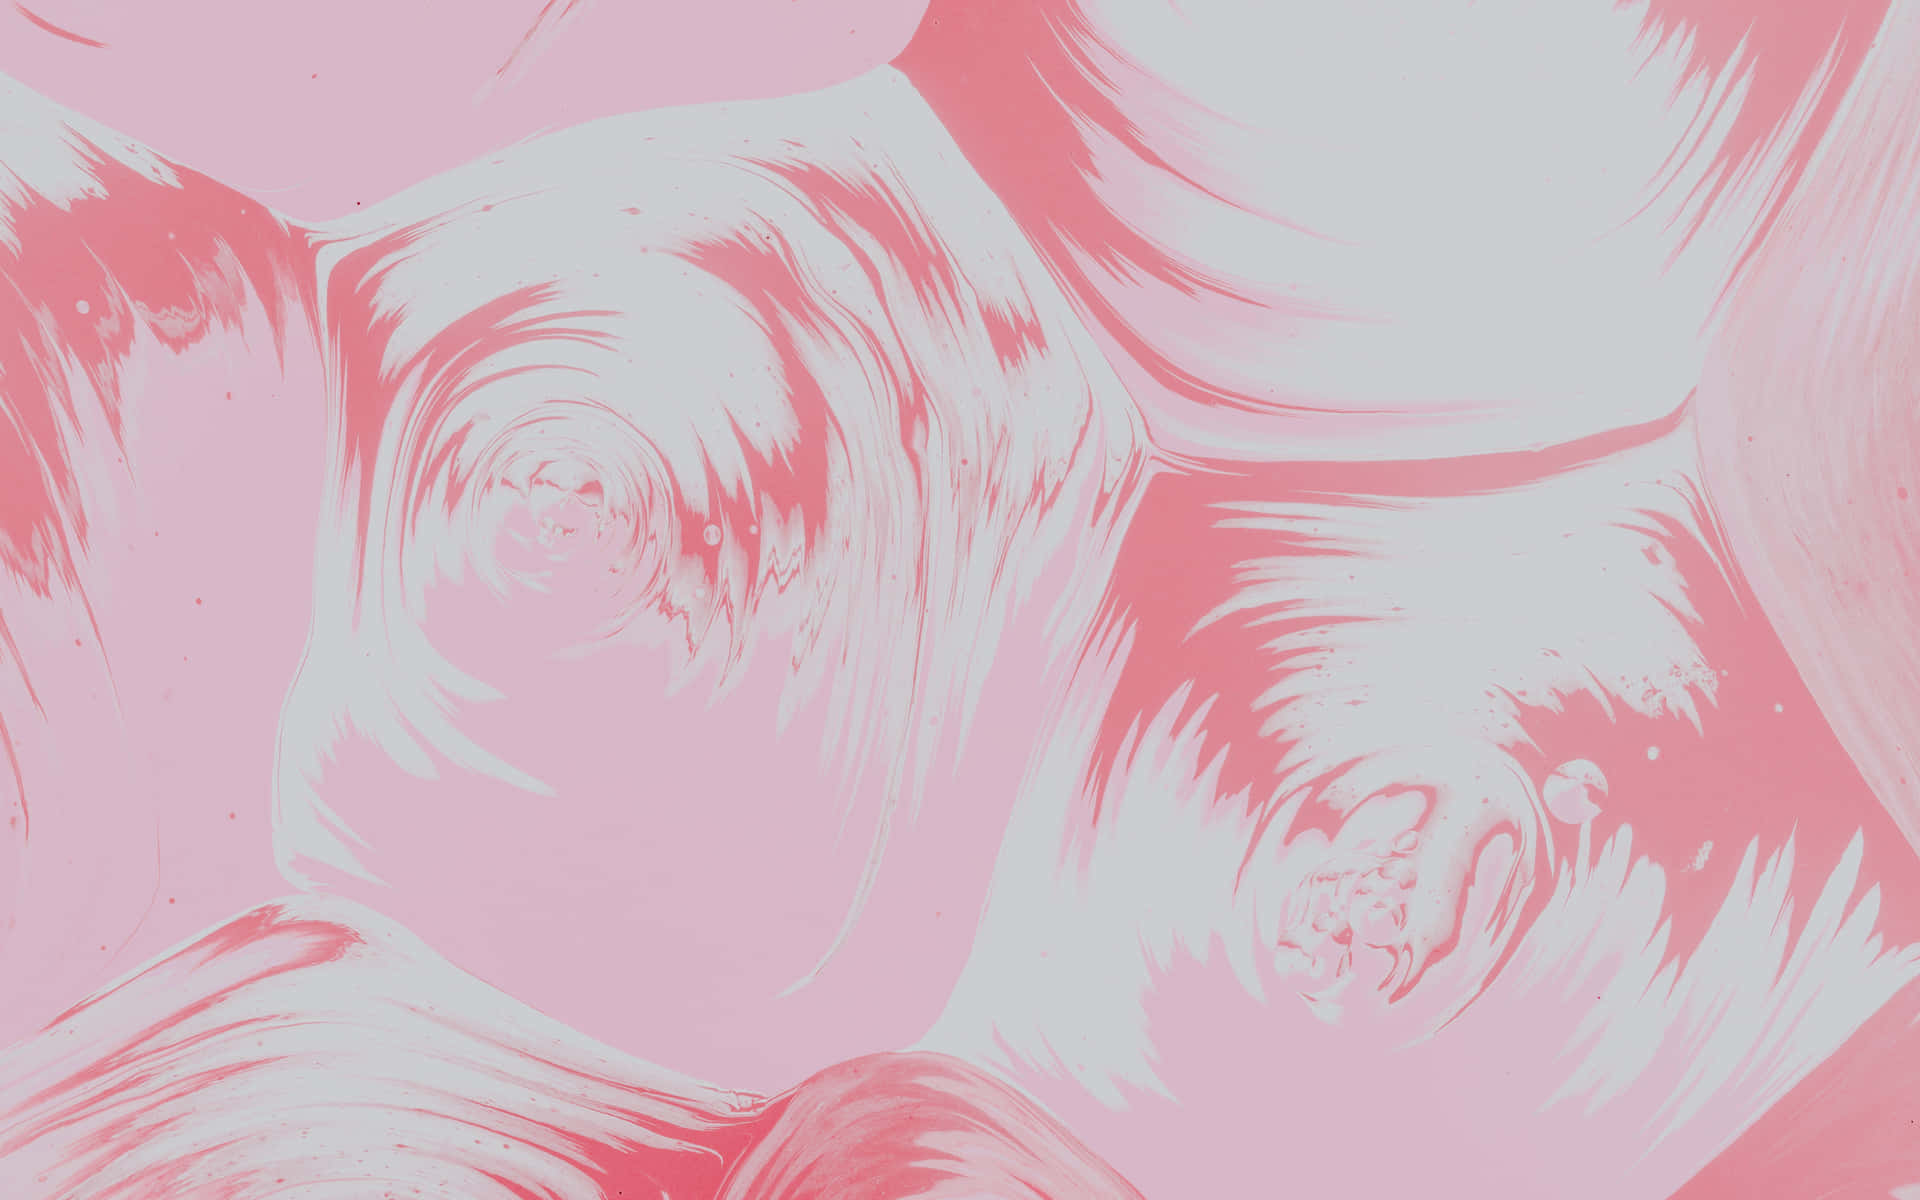 Image  A vibrant pink abstract background